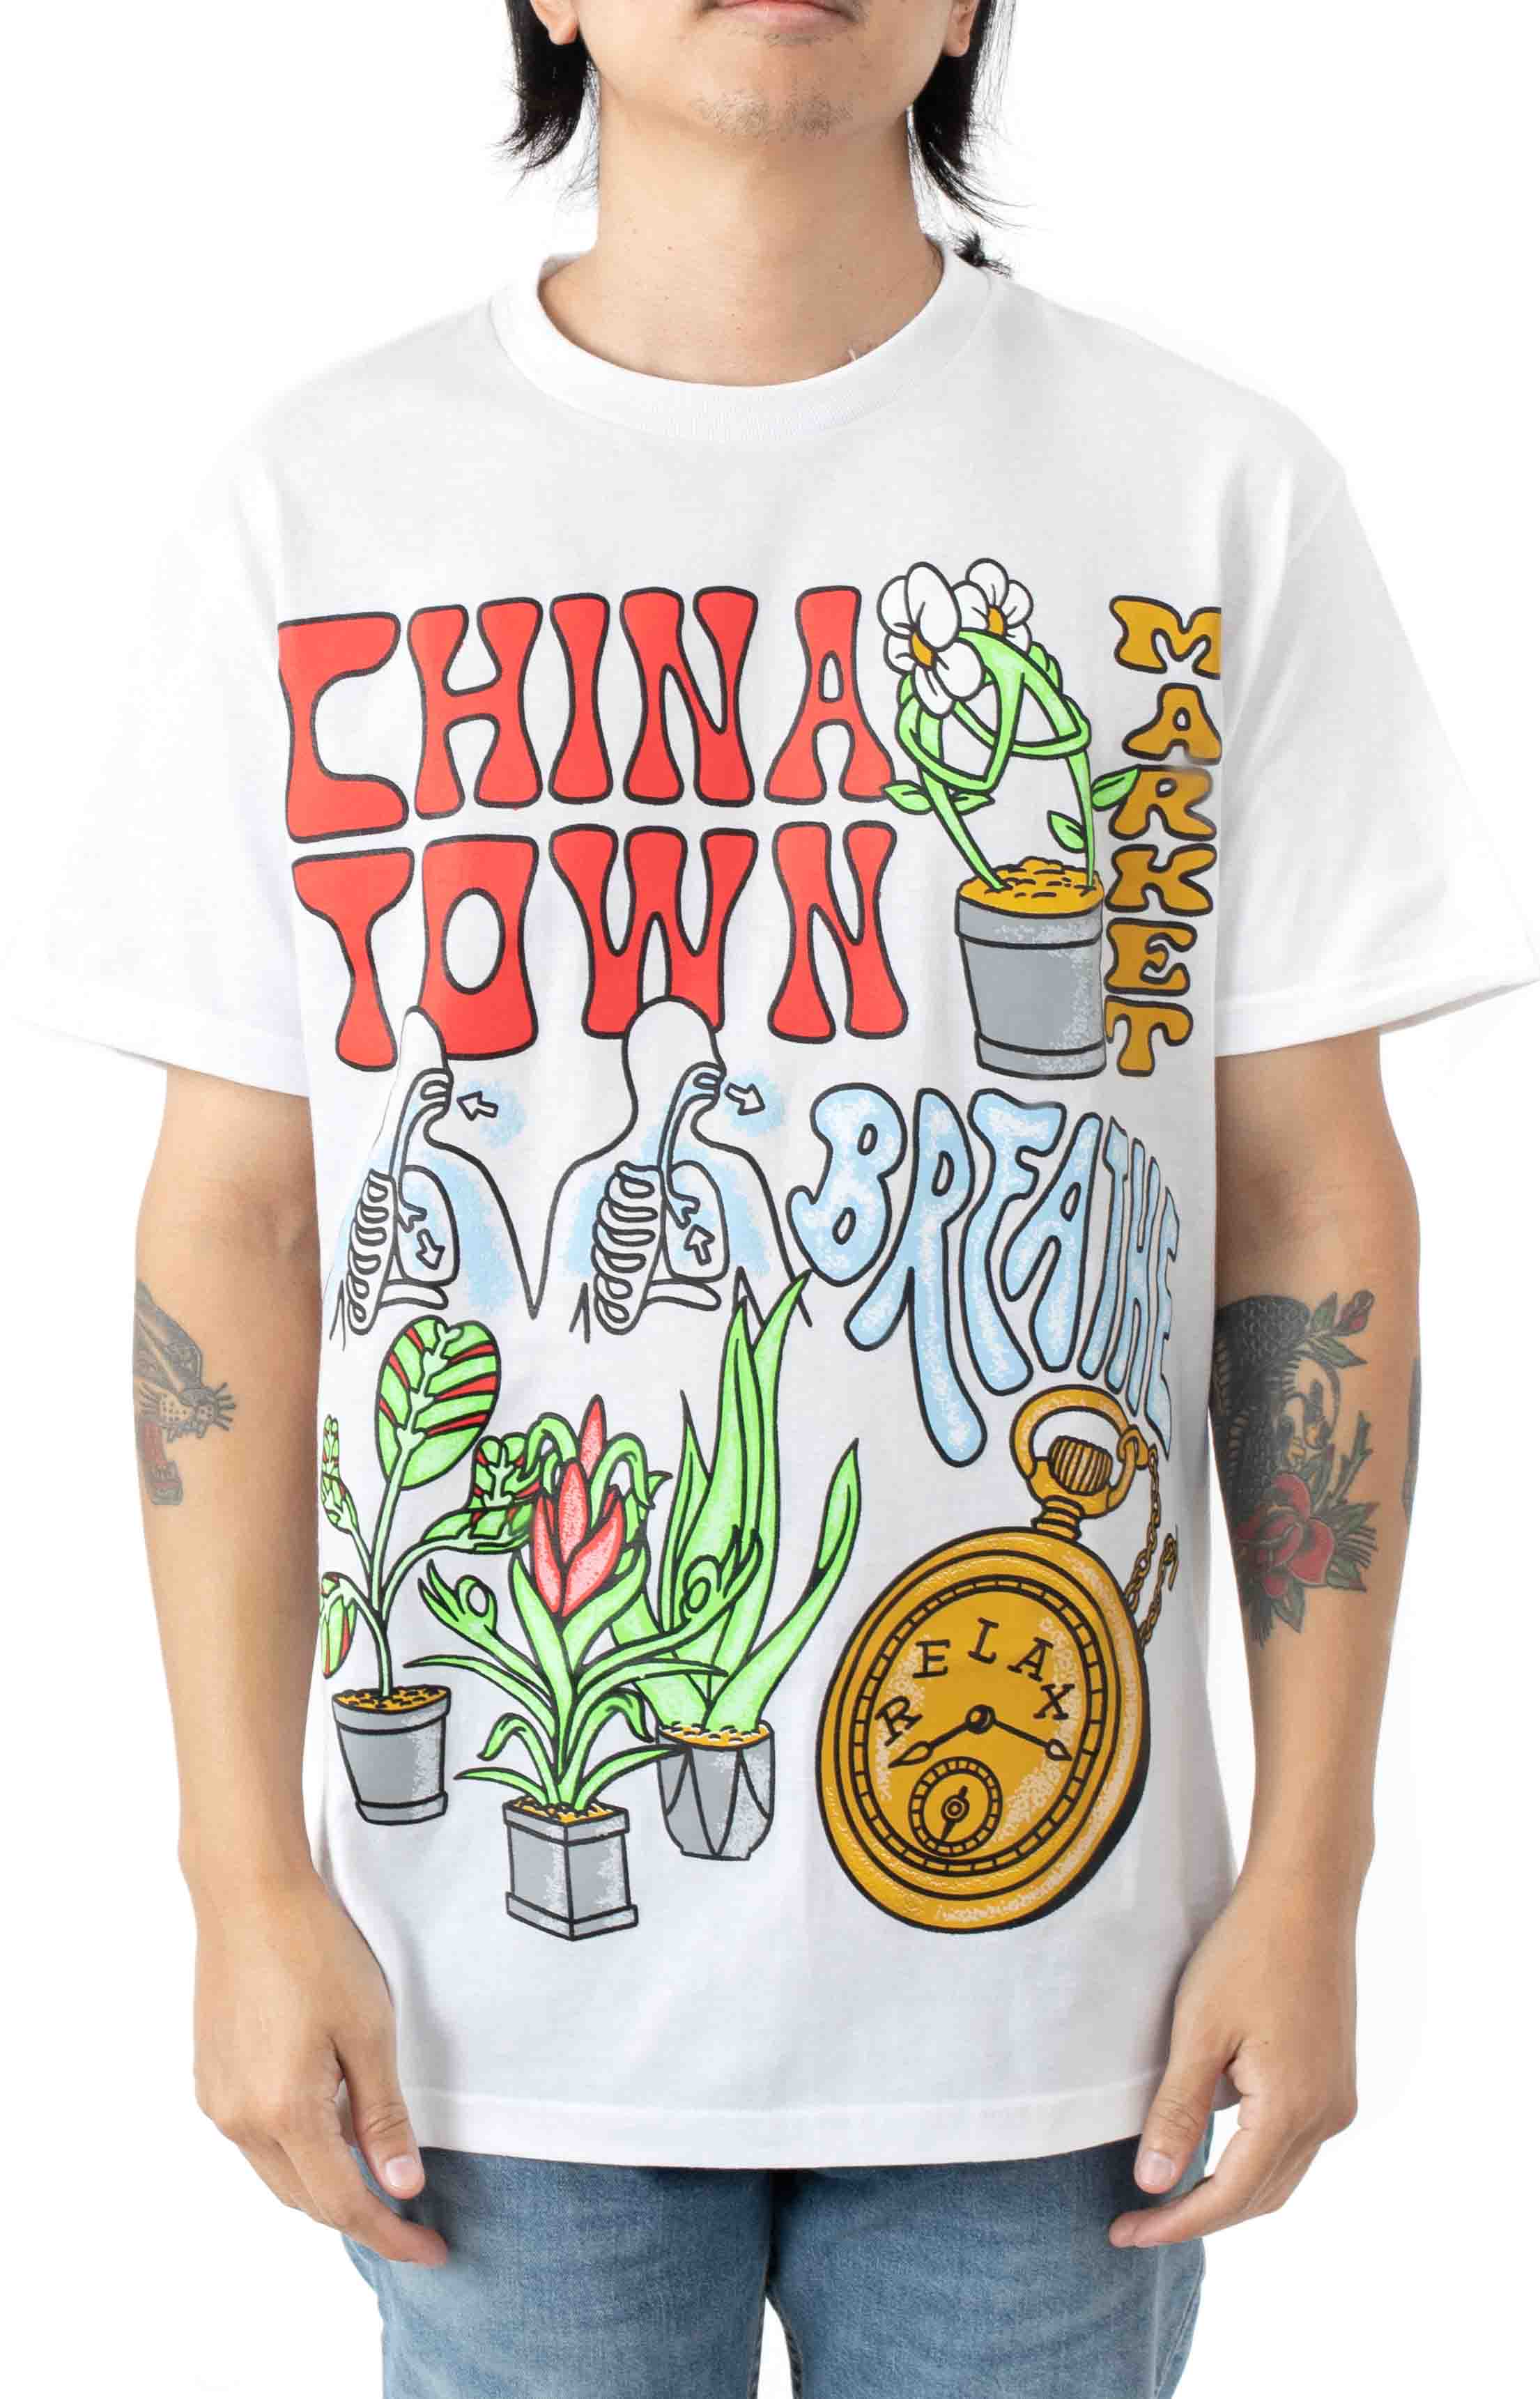 Chinatown Time Lord T-Shirt - White